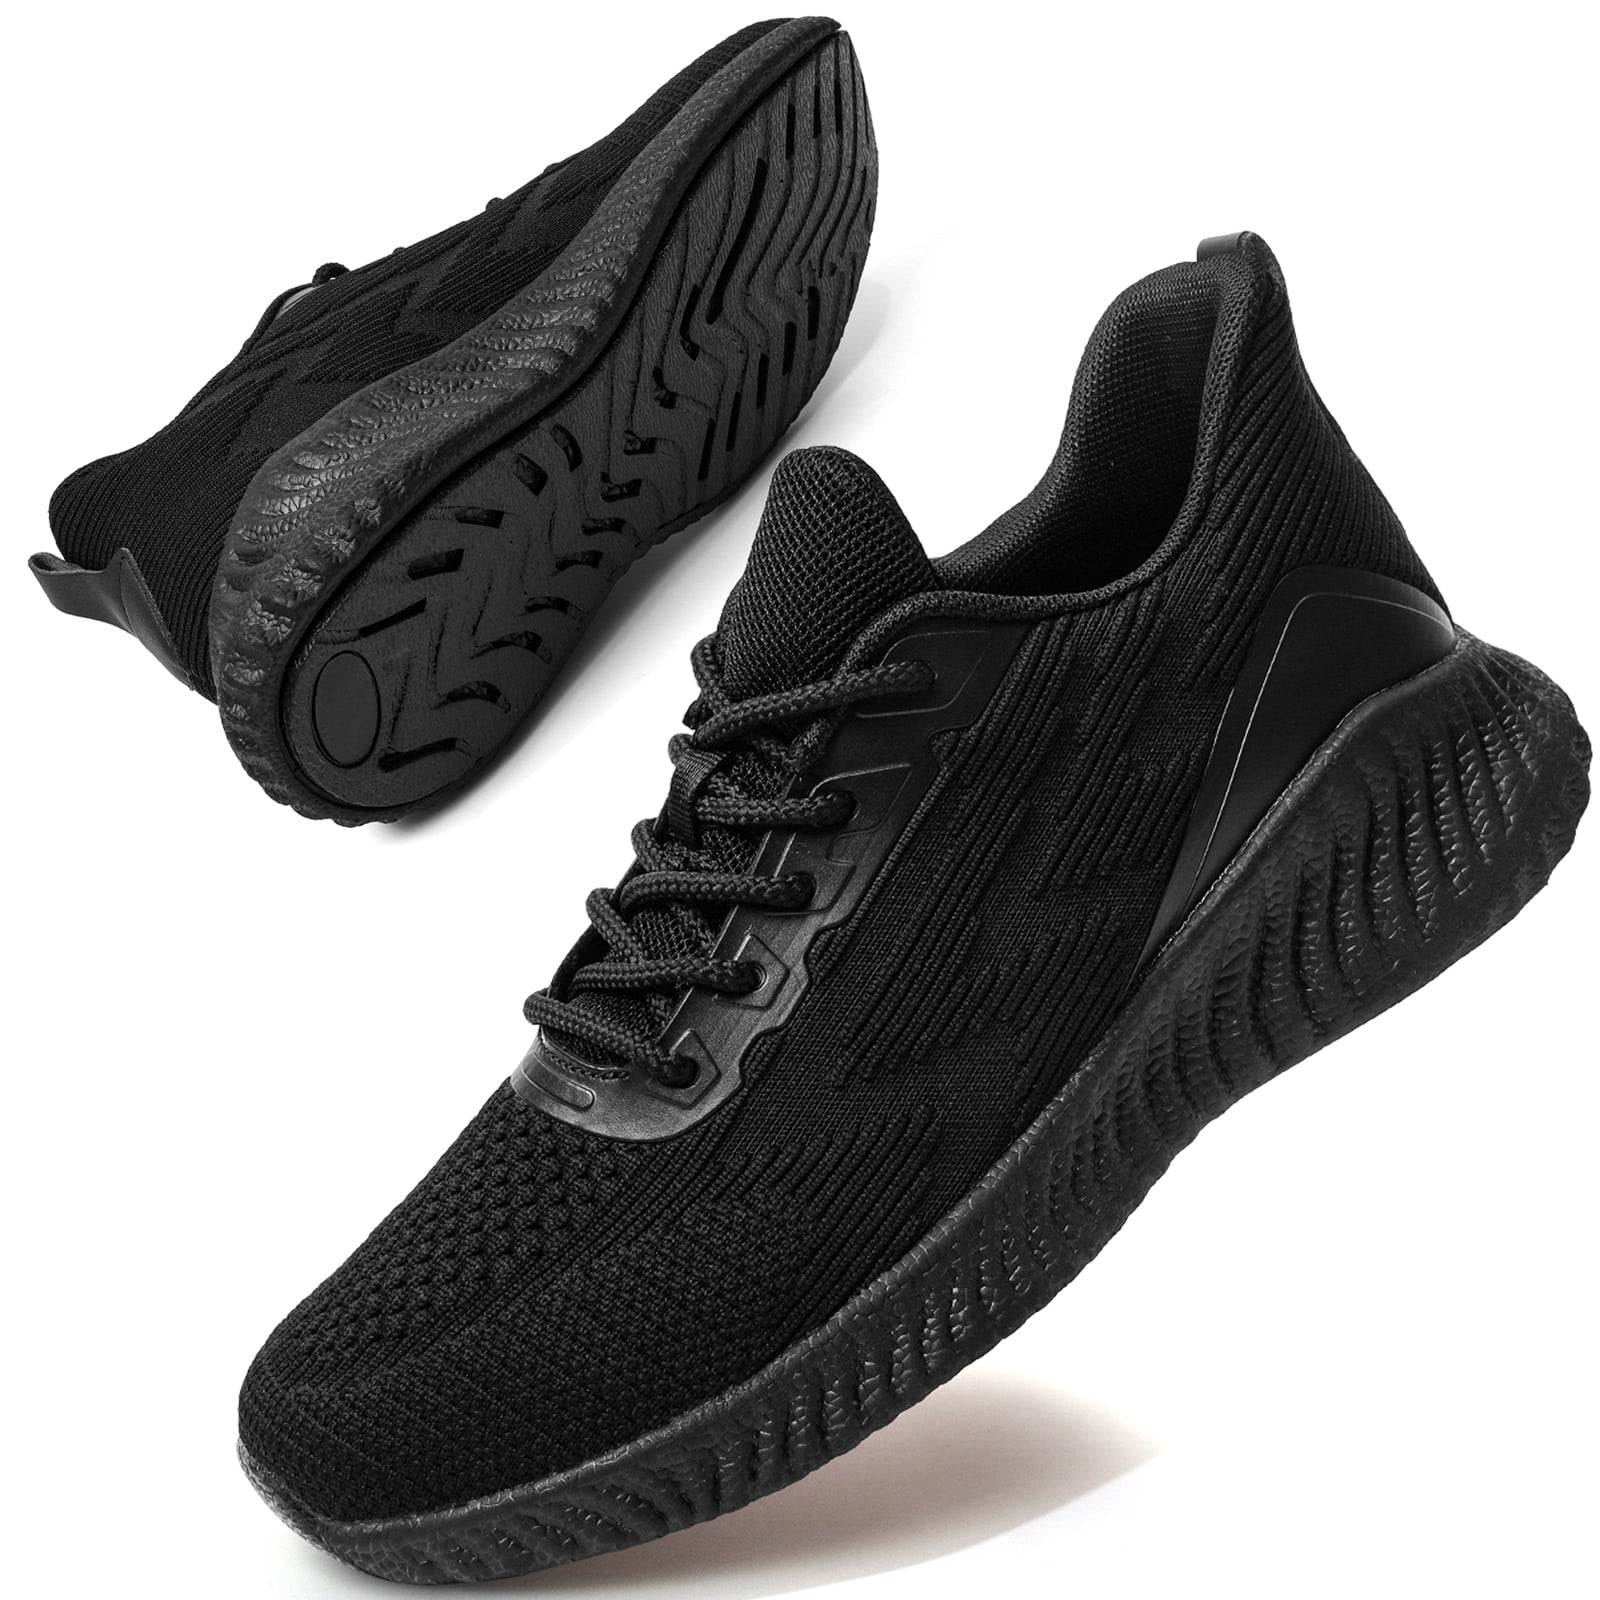 Akk Womens Running Tennis Shoes Lace Up Knitted Sneakers Black Size 7 ...